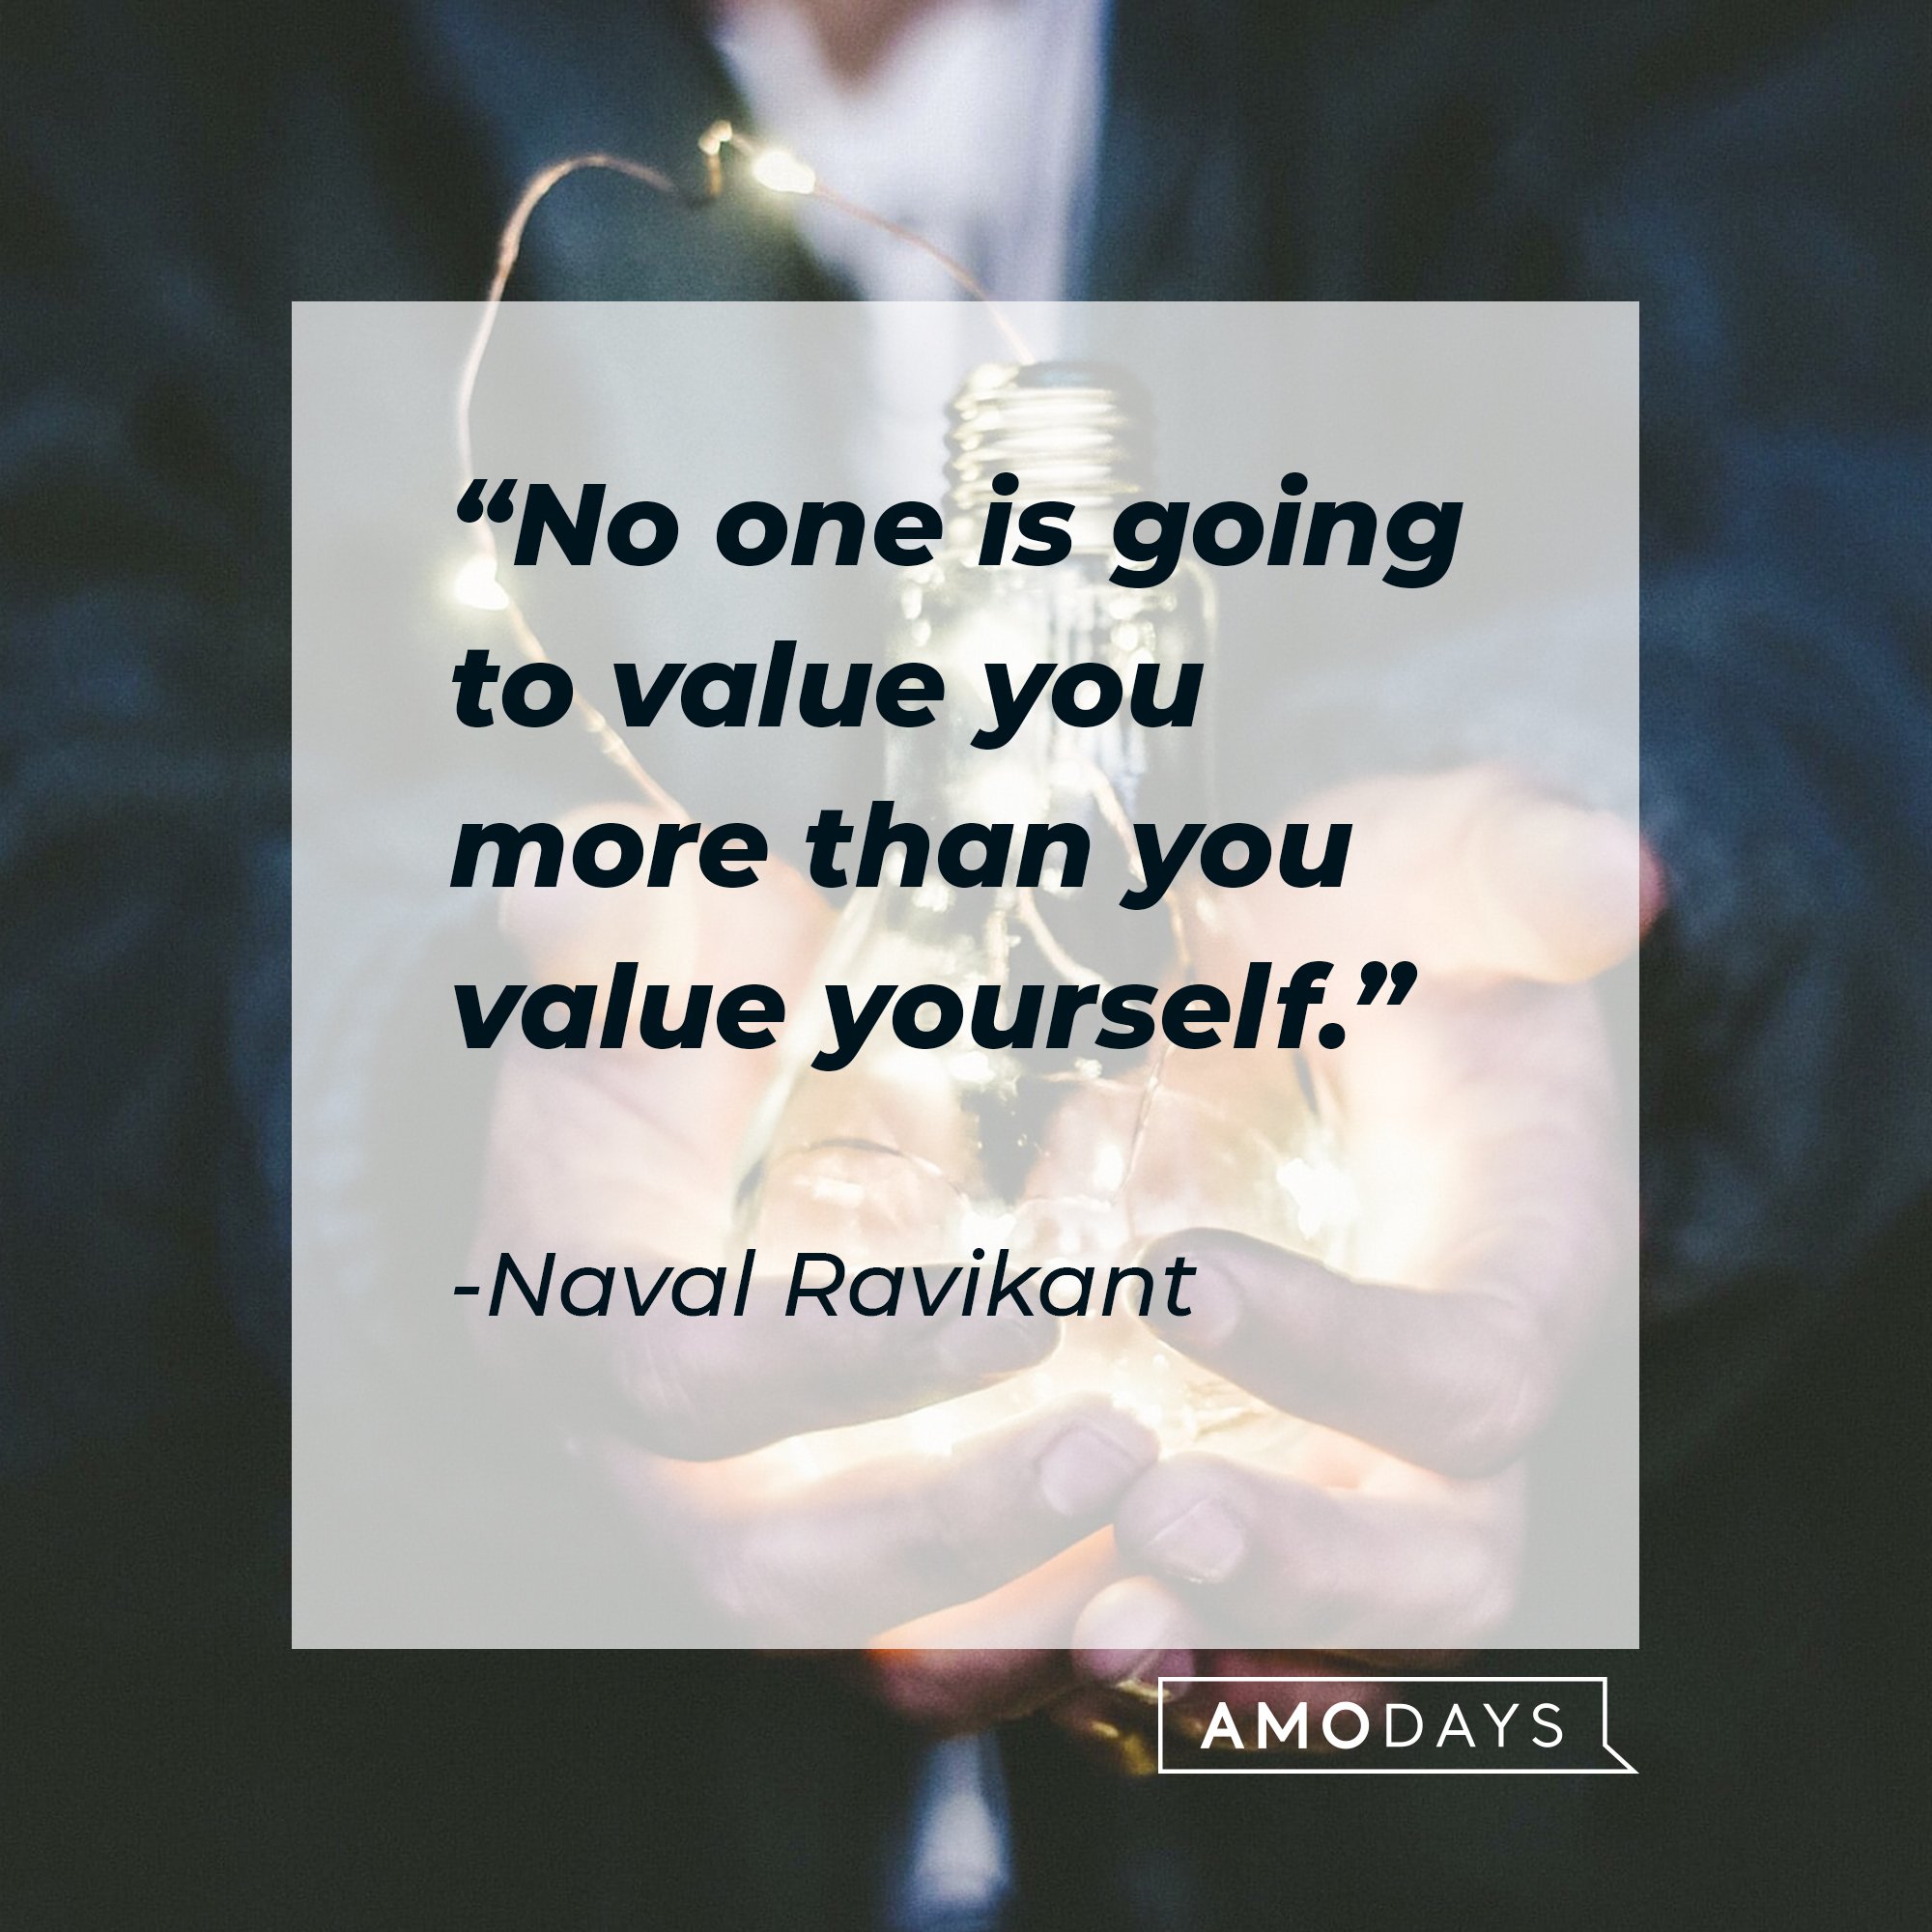 's quote: "No one is going to value you more than you value yourself." | Image: AmoDays